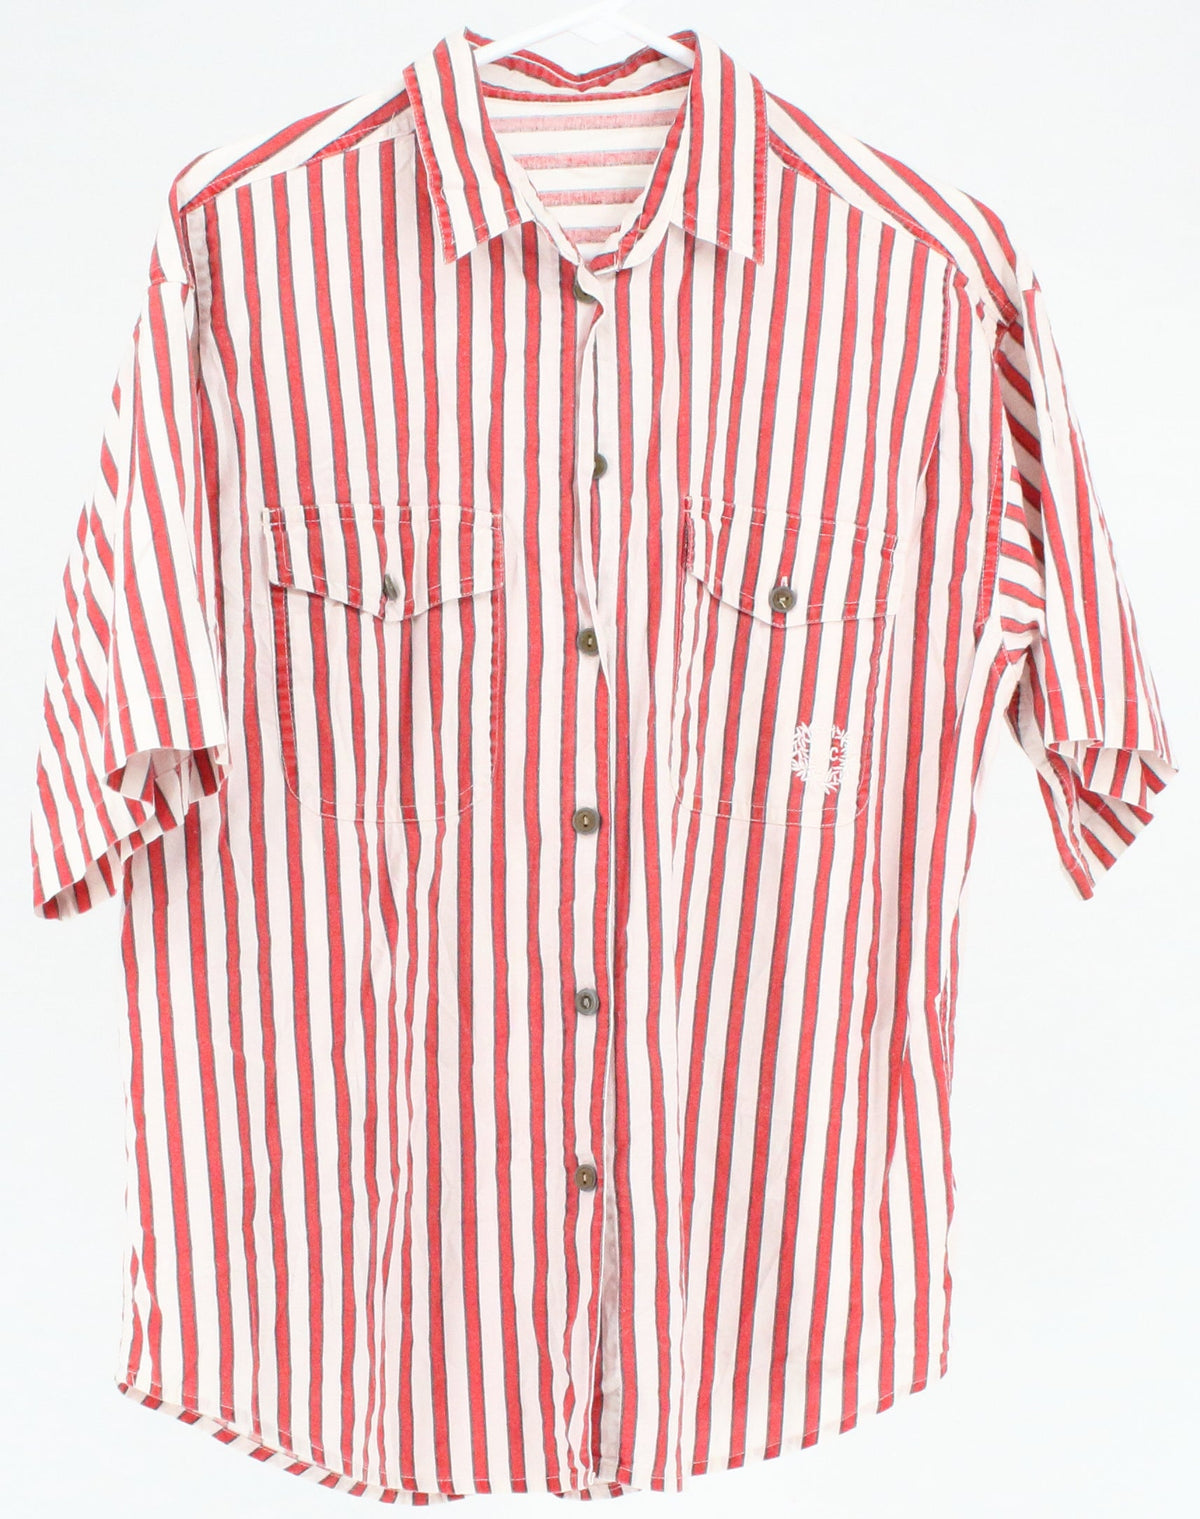 Red & White KSC Embroidered logo Vertical Striped Short Sleeve Shirt